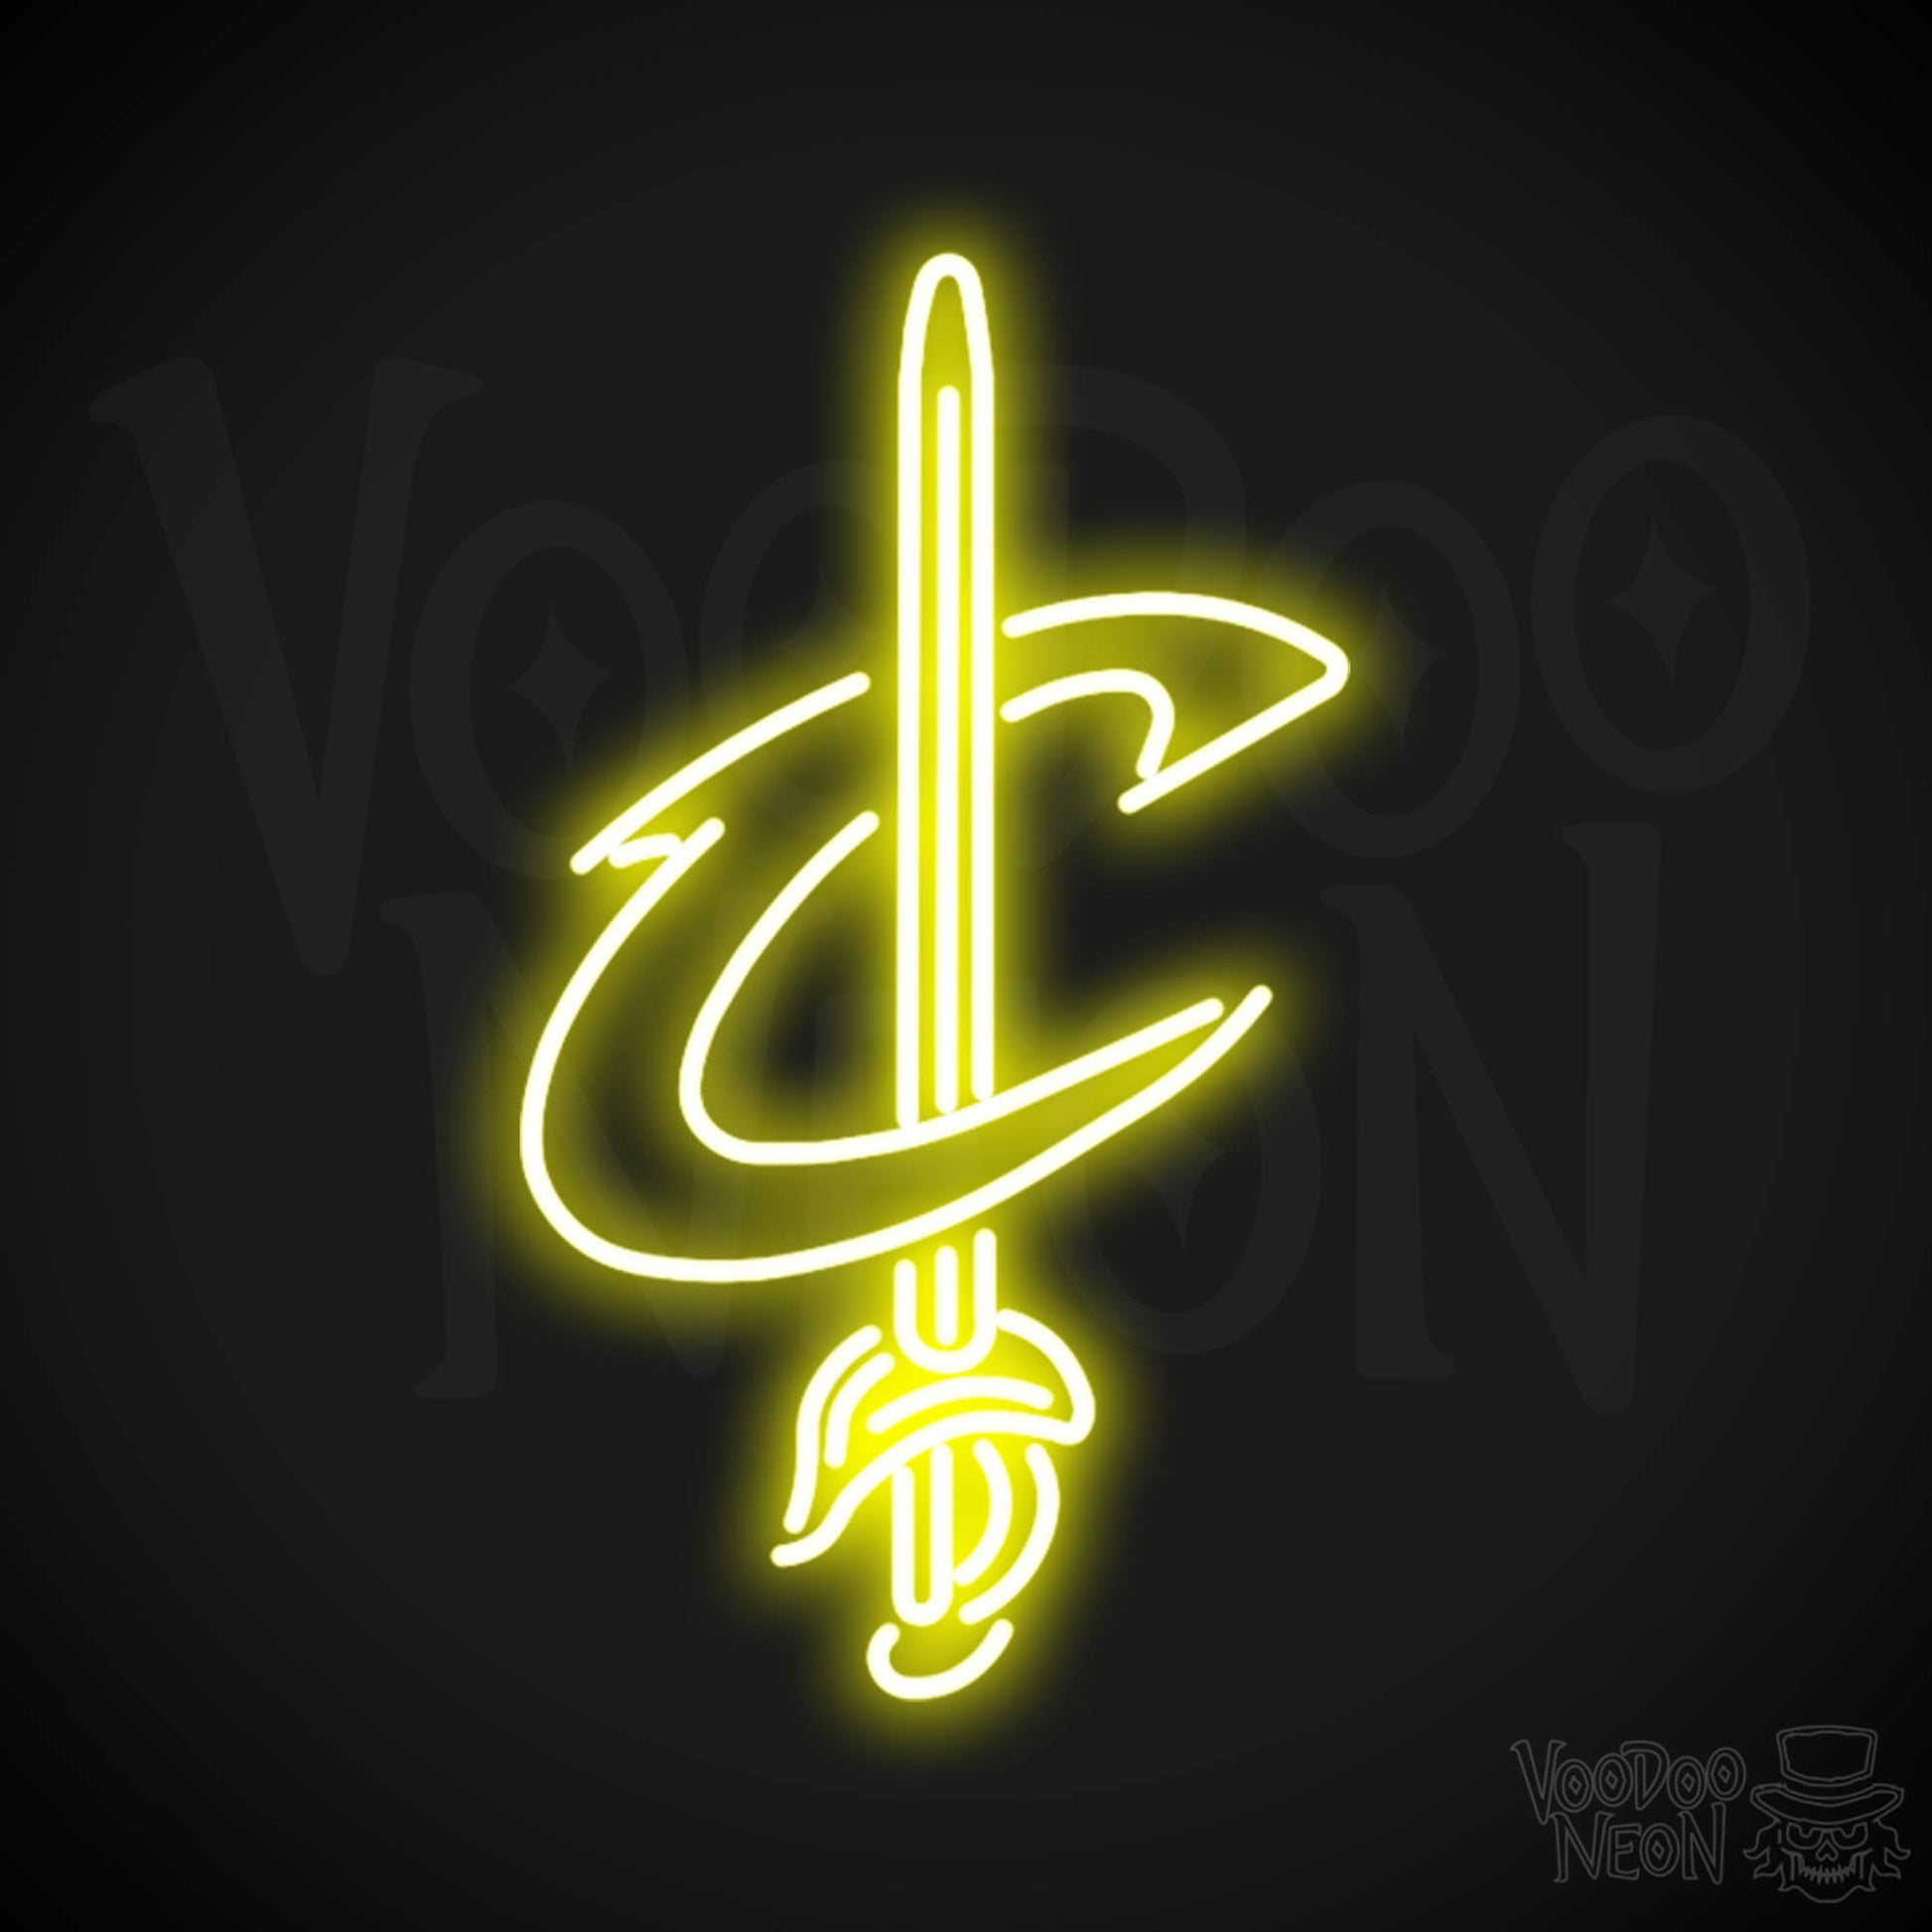 Cleveland Cavaliers Neon Sign - Cleveland Cavaliers Sign - Neon Cavaliers Wall Art - Color Yellow